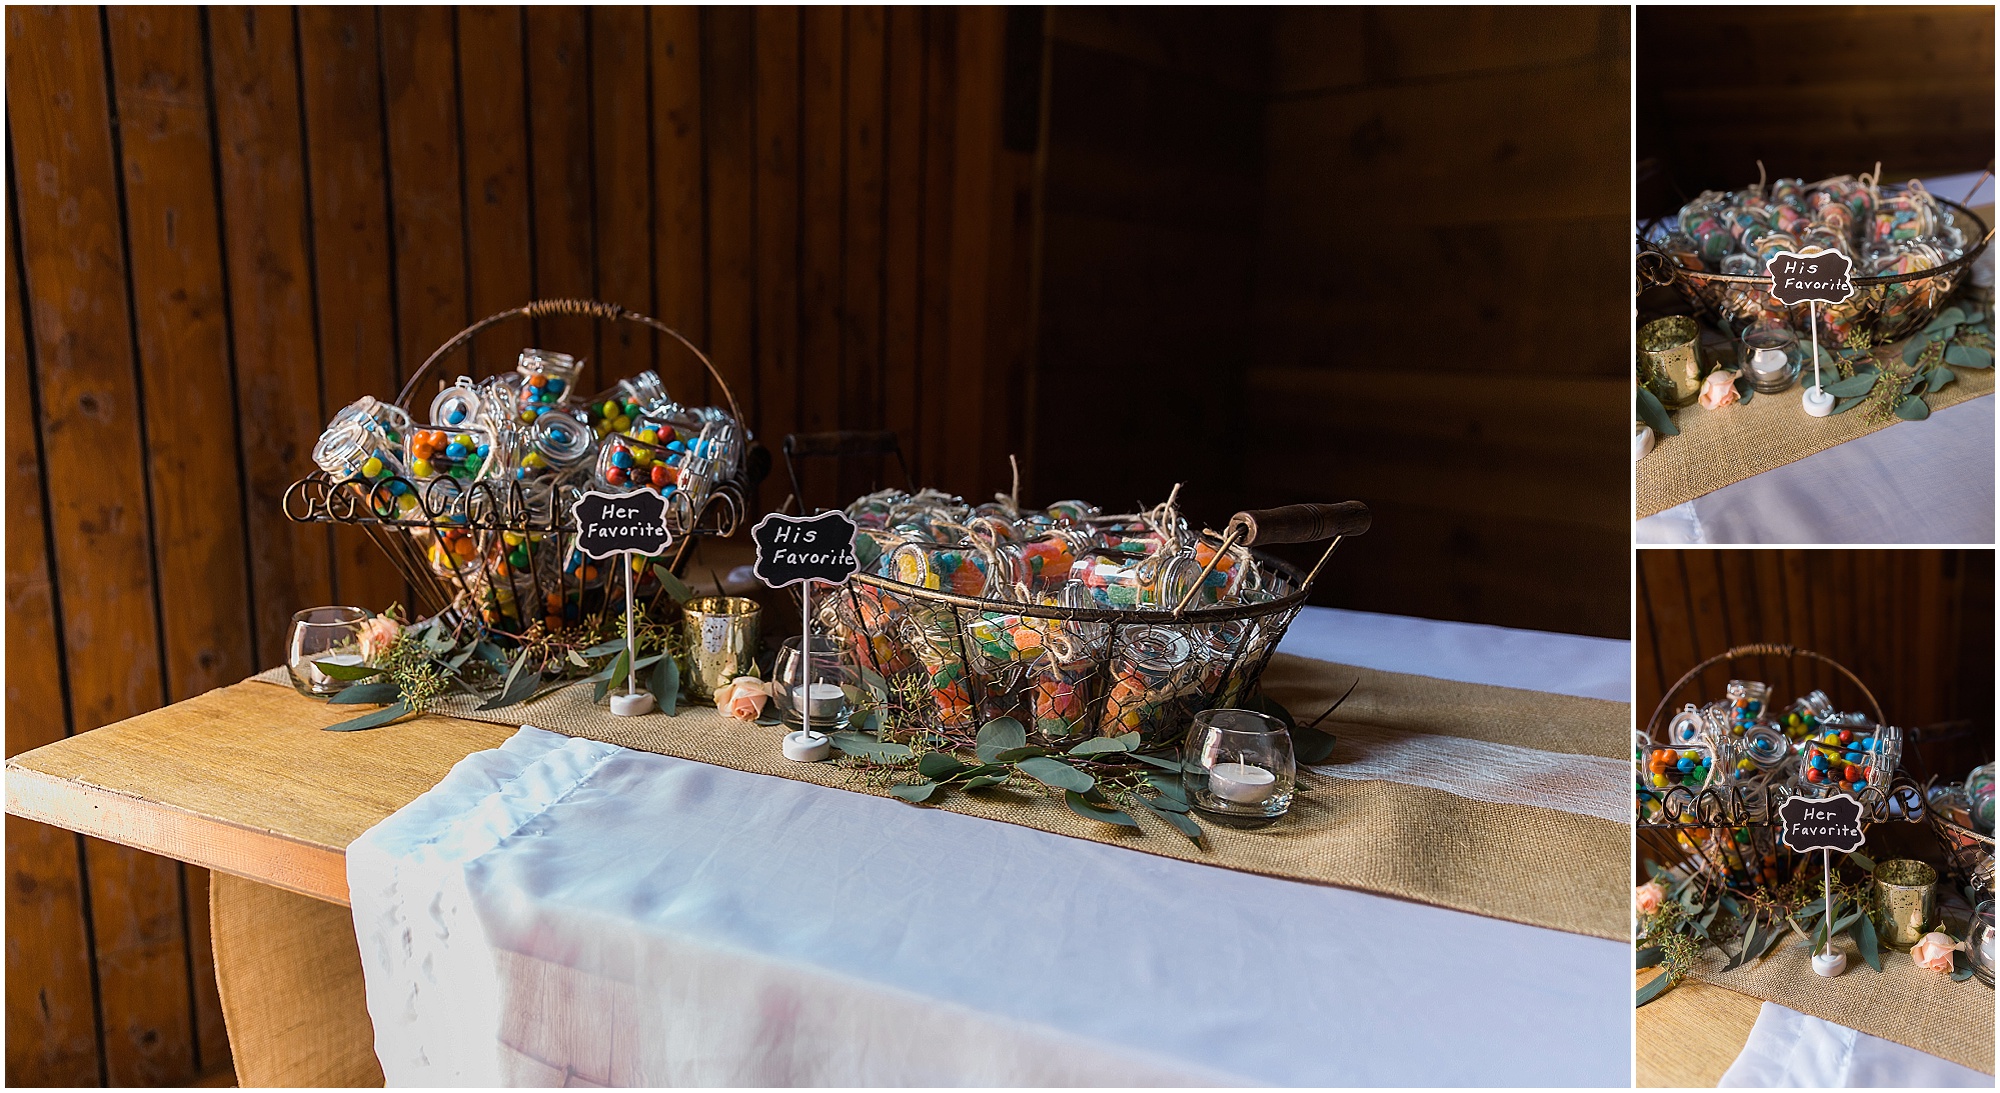 Guests are treated to a candy table with the bride and groom's favorite sweets as favors. Photographed by Bend Oregon wedding photographer Erica Swantek Photography